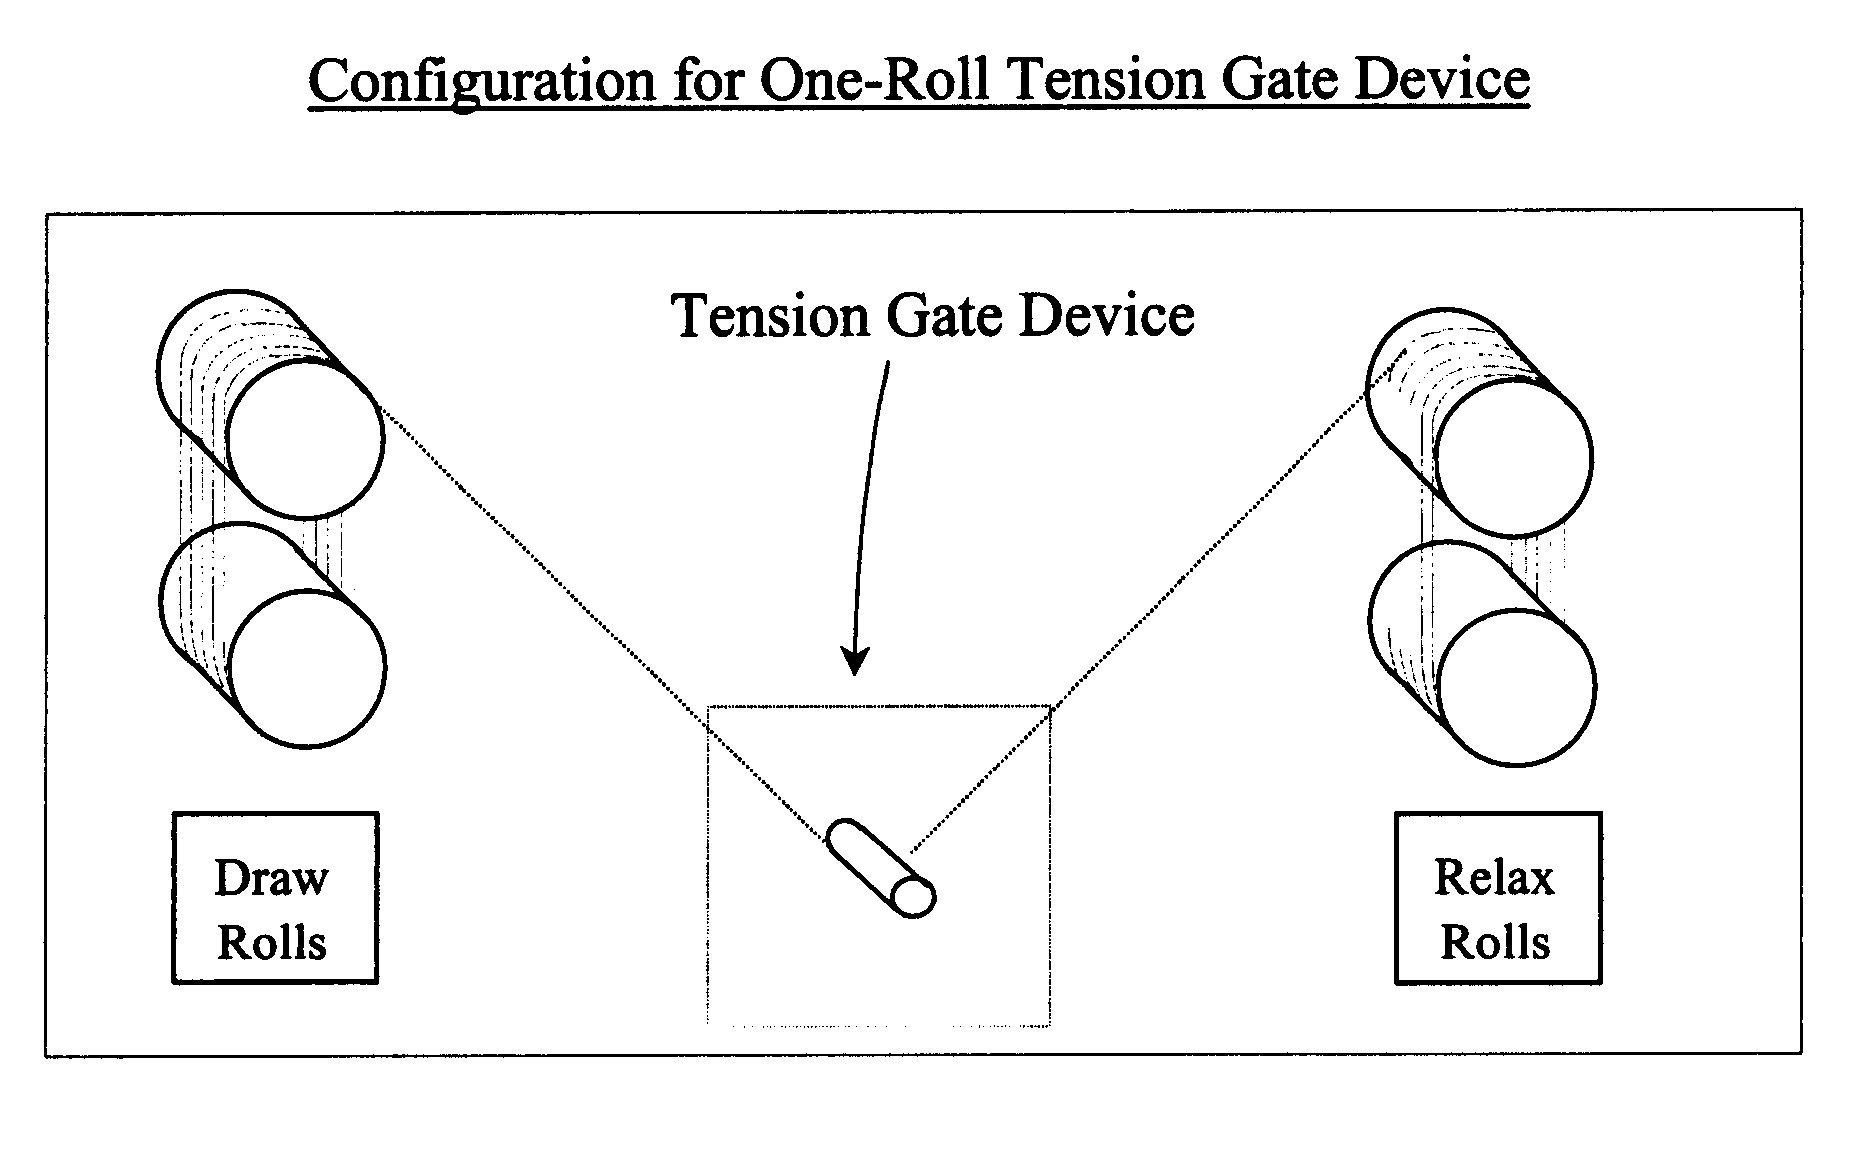 Ultra low-tension relax process and tension gate-apparatus